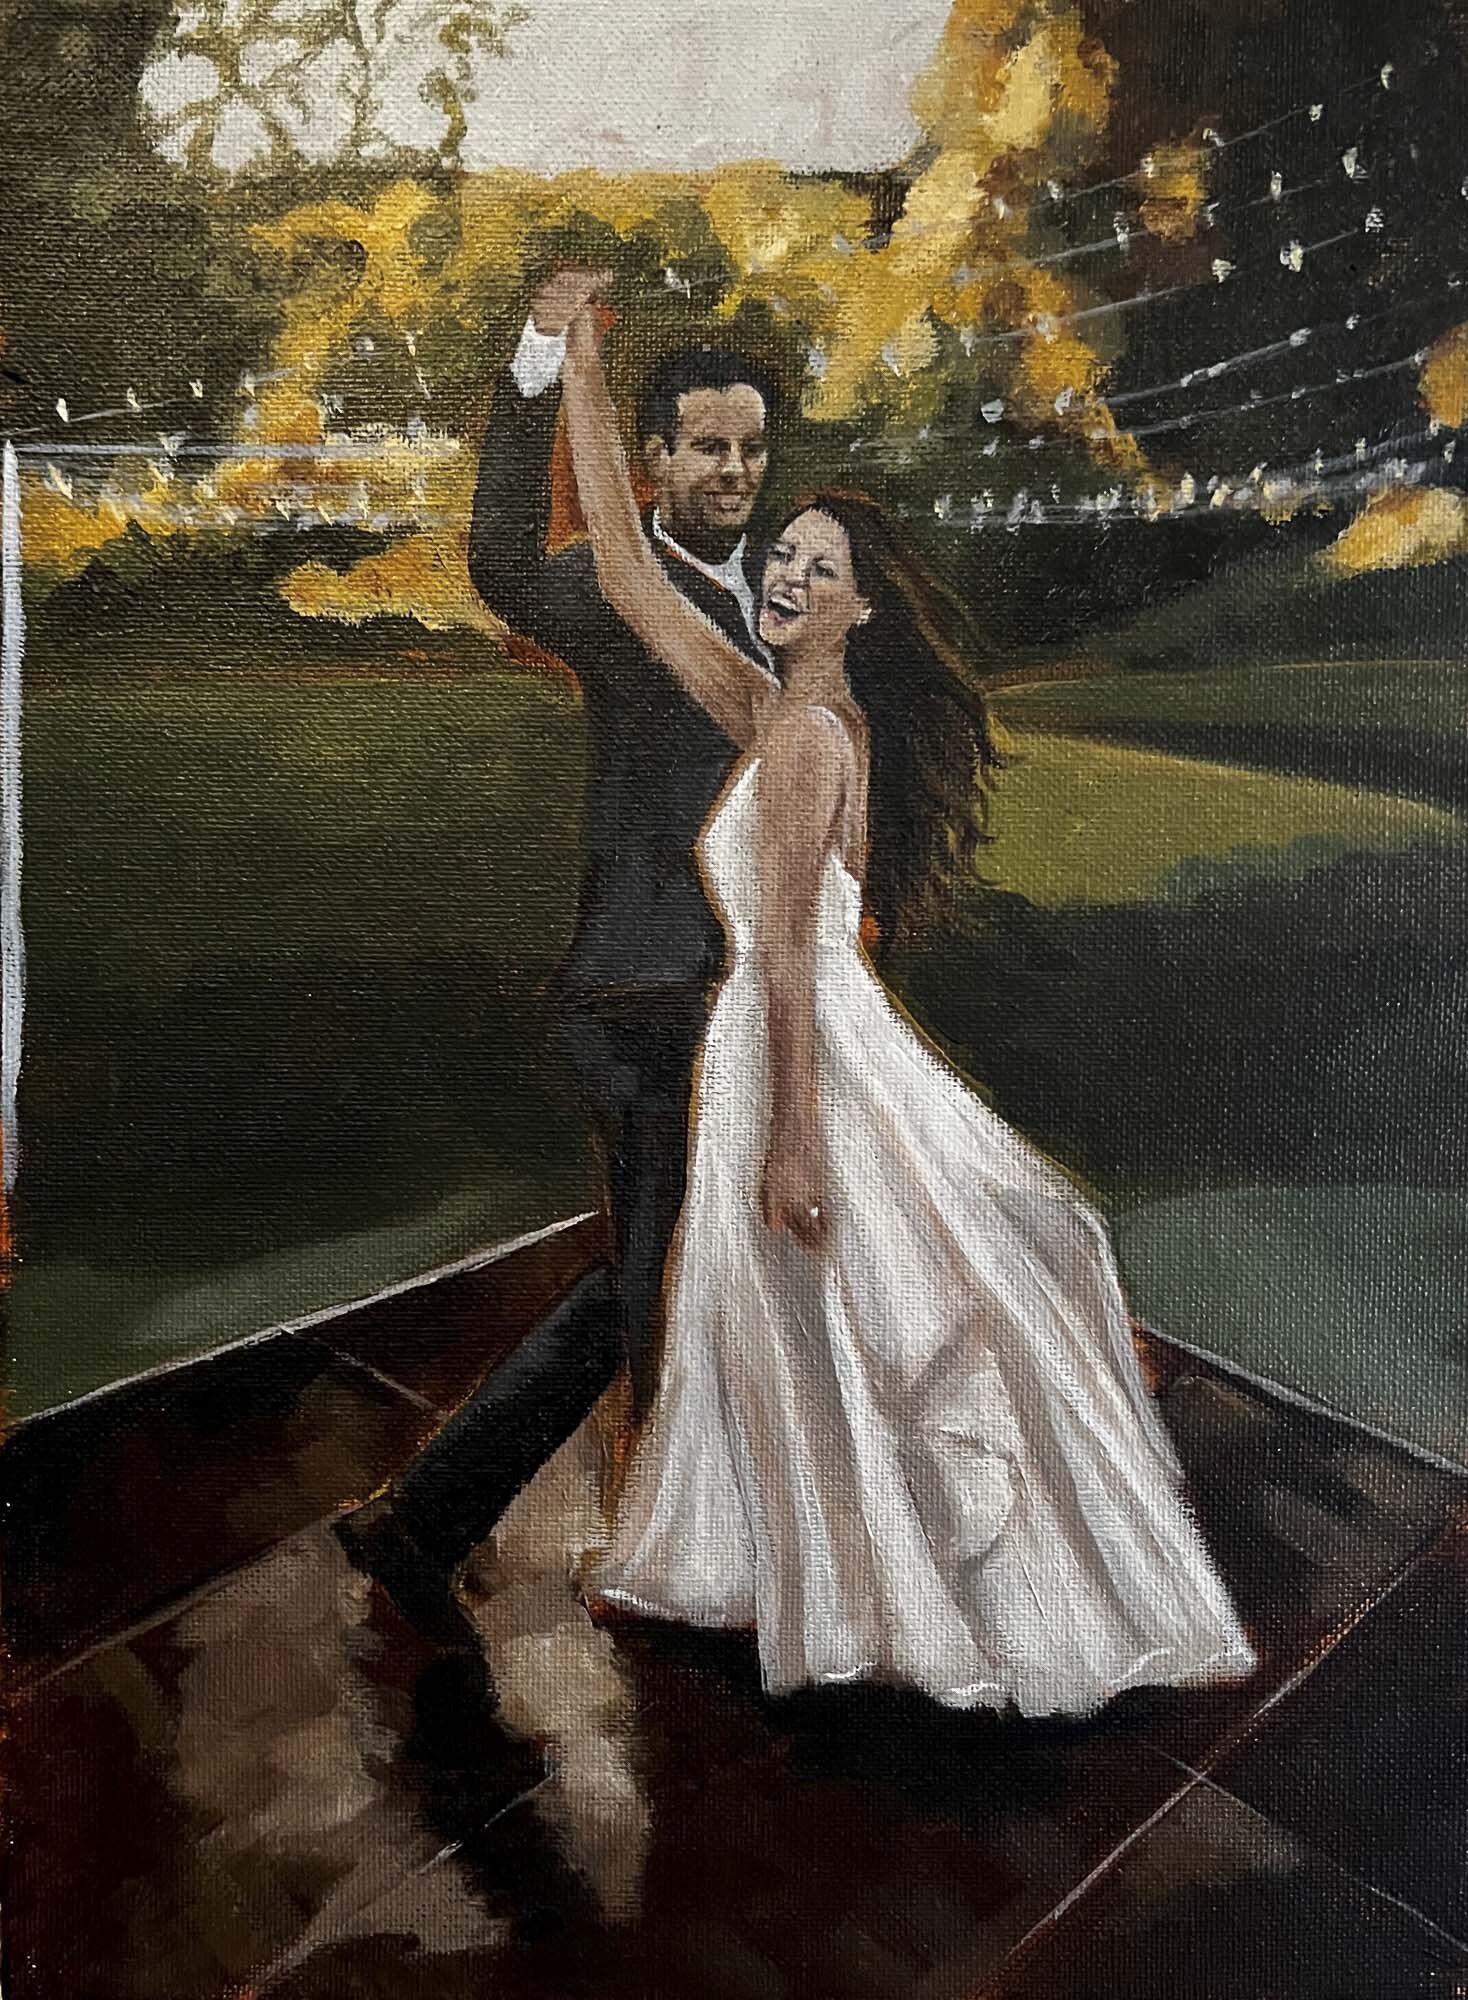 Painting of a first dance outdoors under twinkly lights